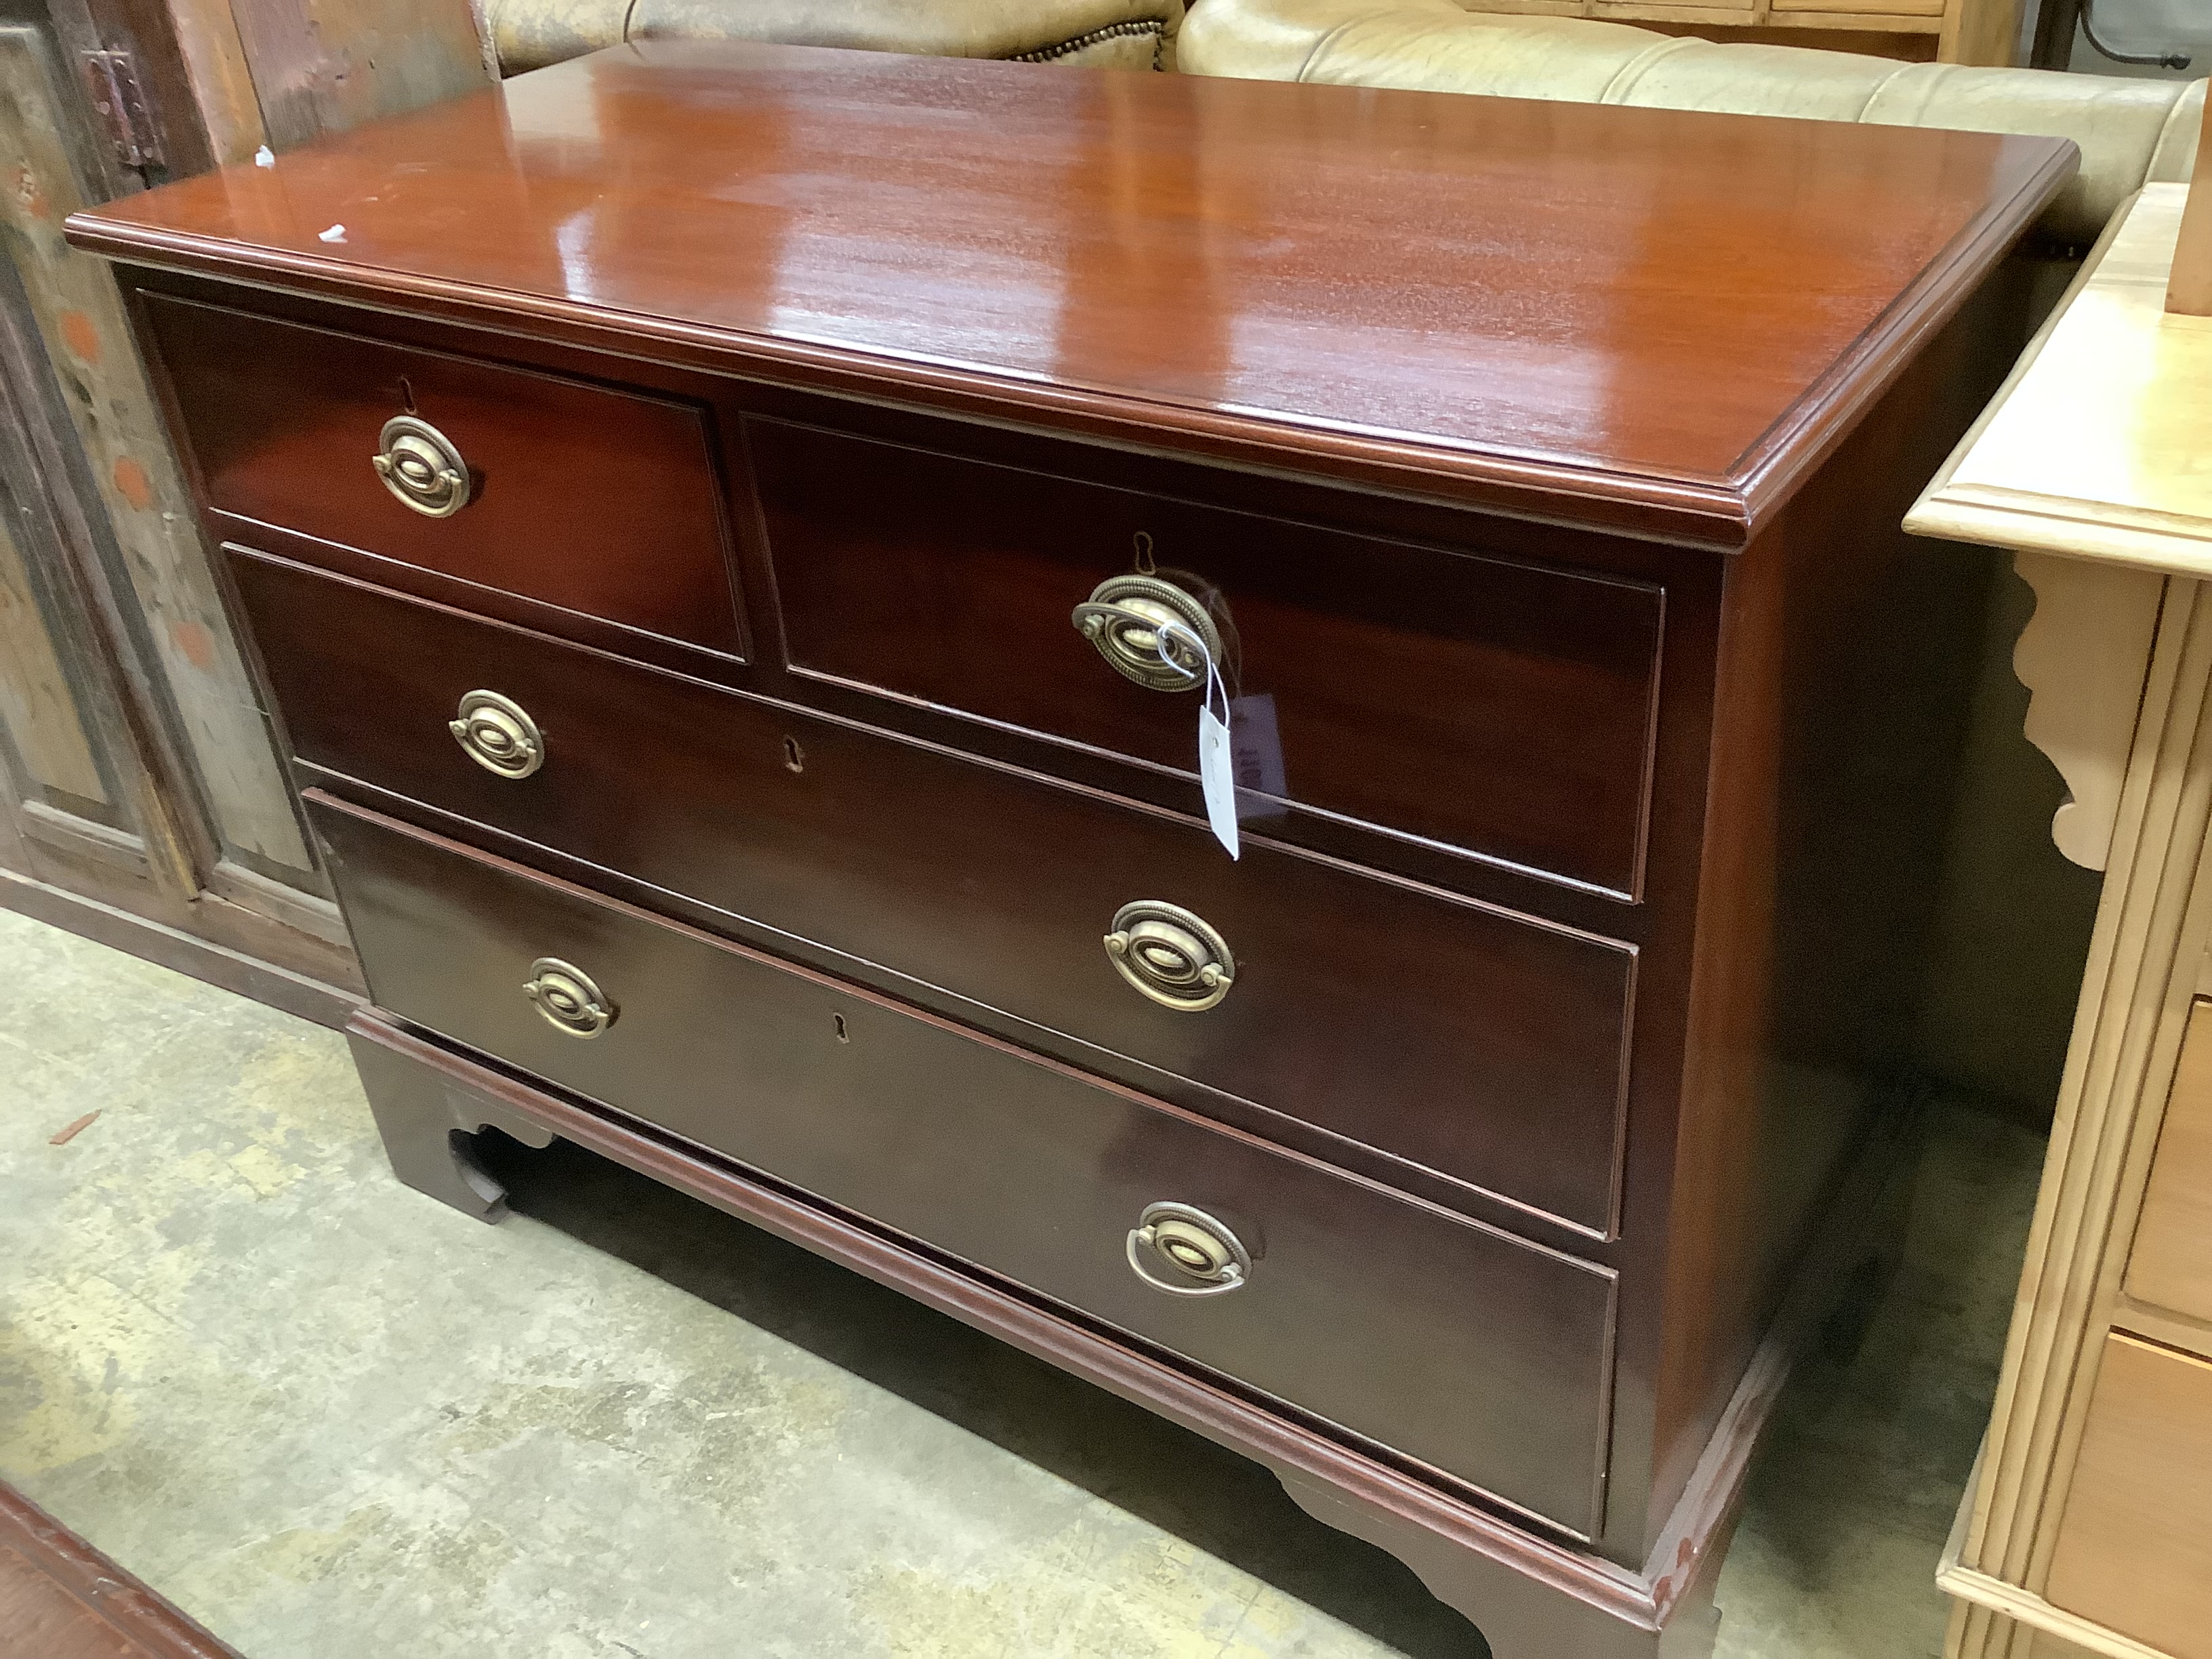 A George IV mahogany chest of drawers, width 109cm, depth 53cm, height 82cm